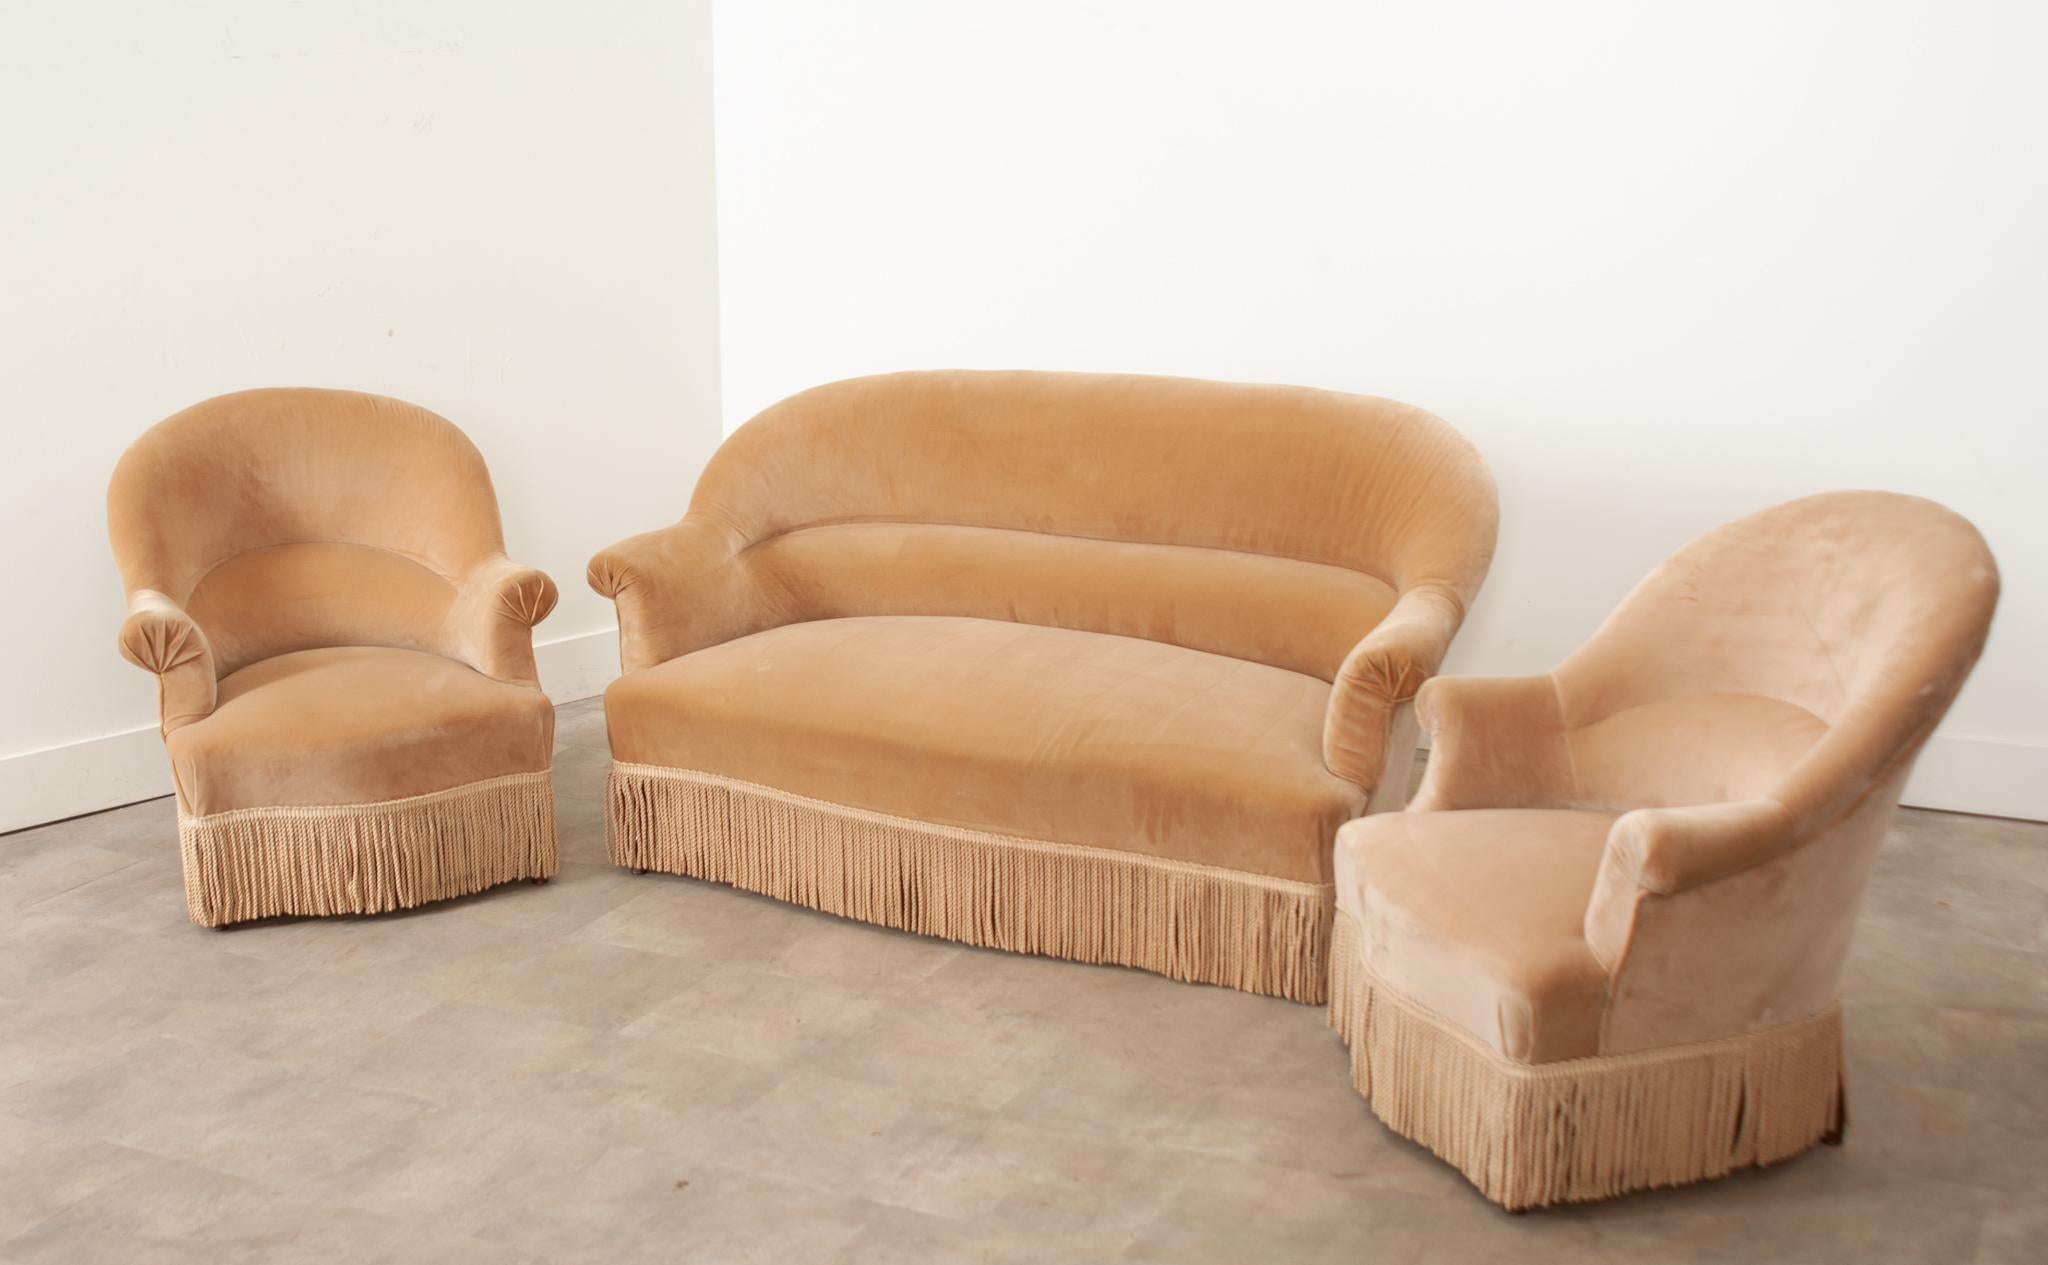 An eye-catching and very comfortable French vintage Art Deco style parlor set with settee and two chairs. Sand colored velvet covers the entire set featuring classic shapes and plush fringe. A wonderful combination of comfort and composition, this